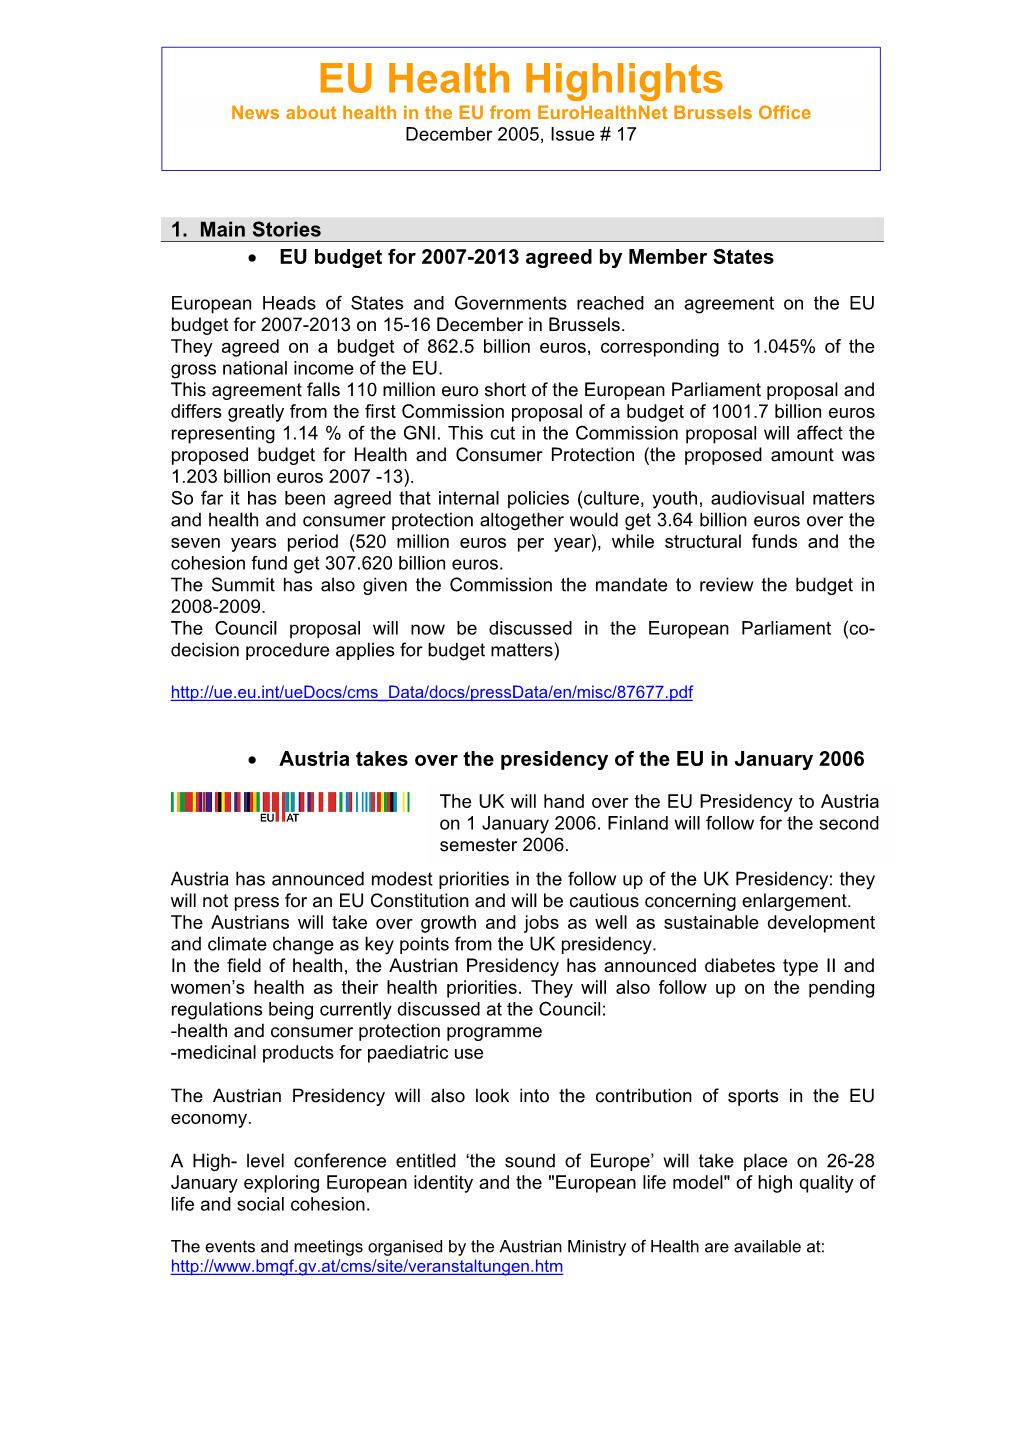 EU Health Highlights News About Health in the EU from Eurohealthnet Brussels Office December 2005, Issue # 17